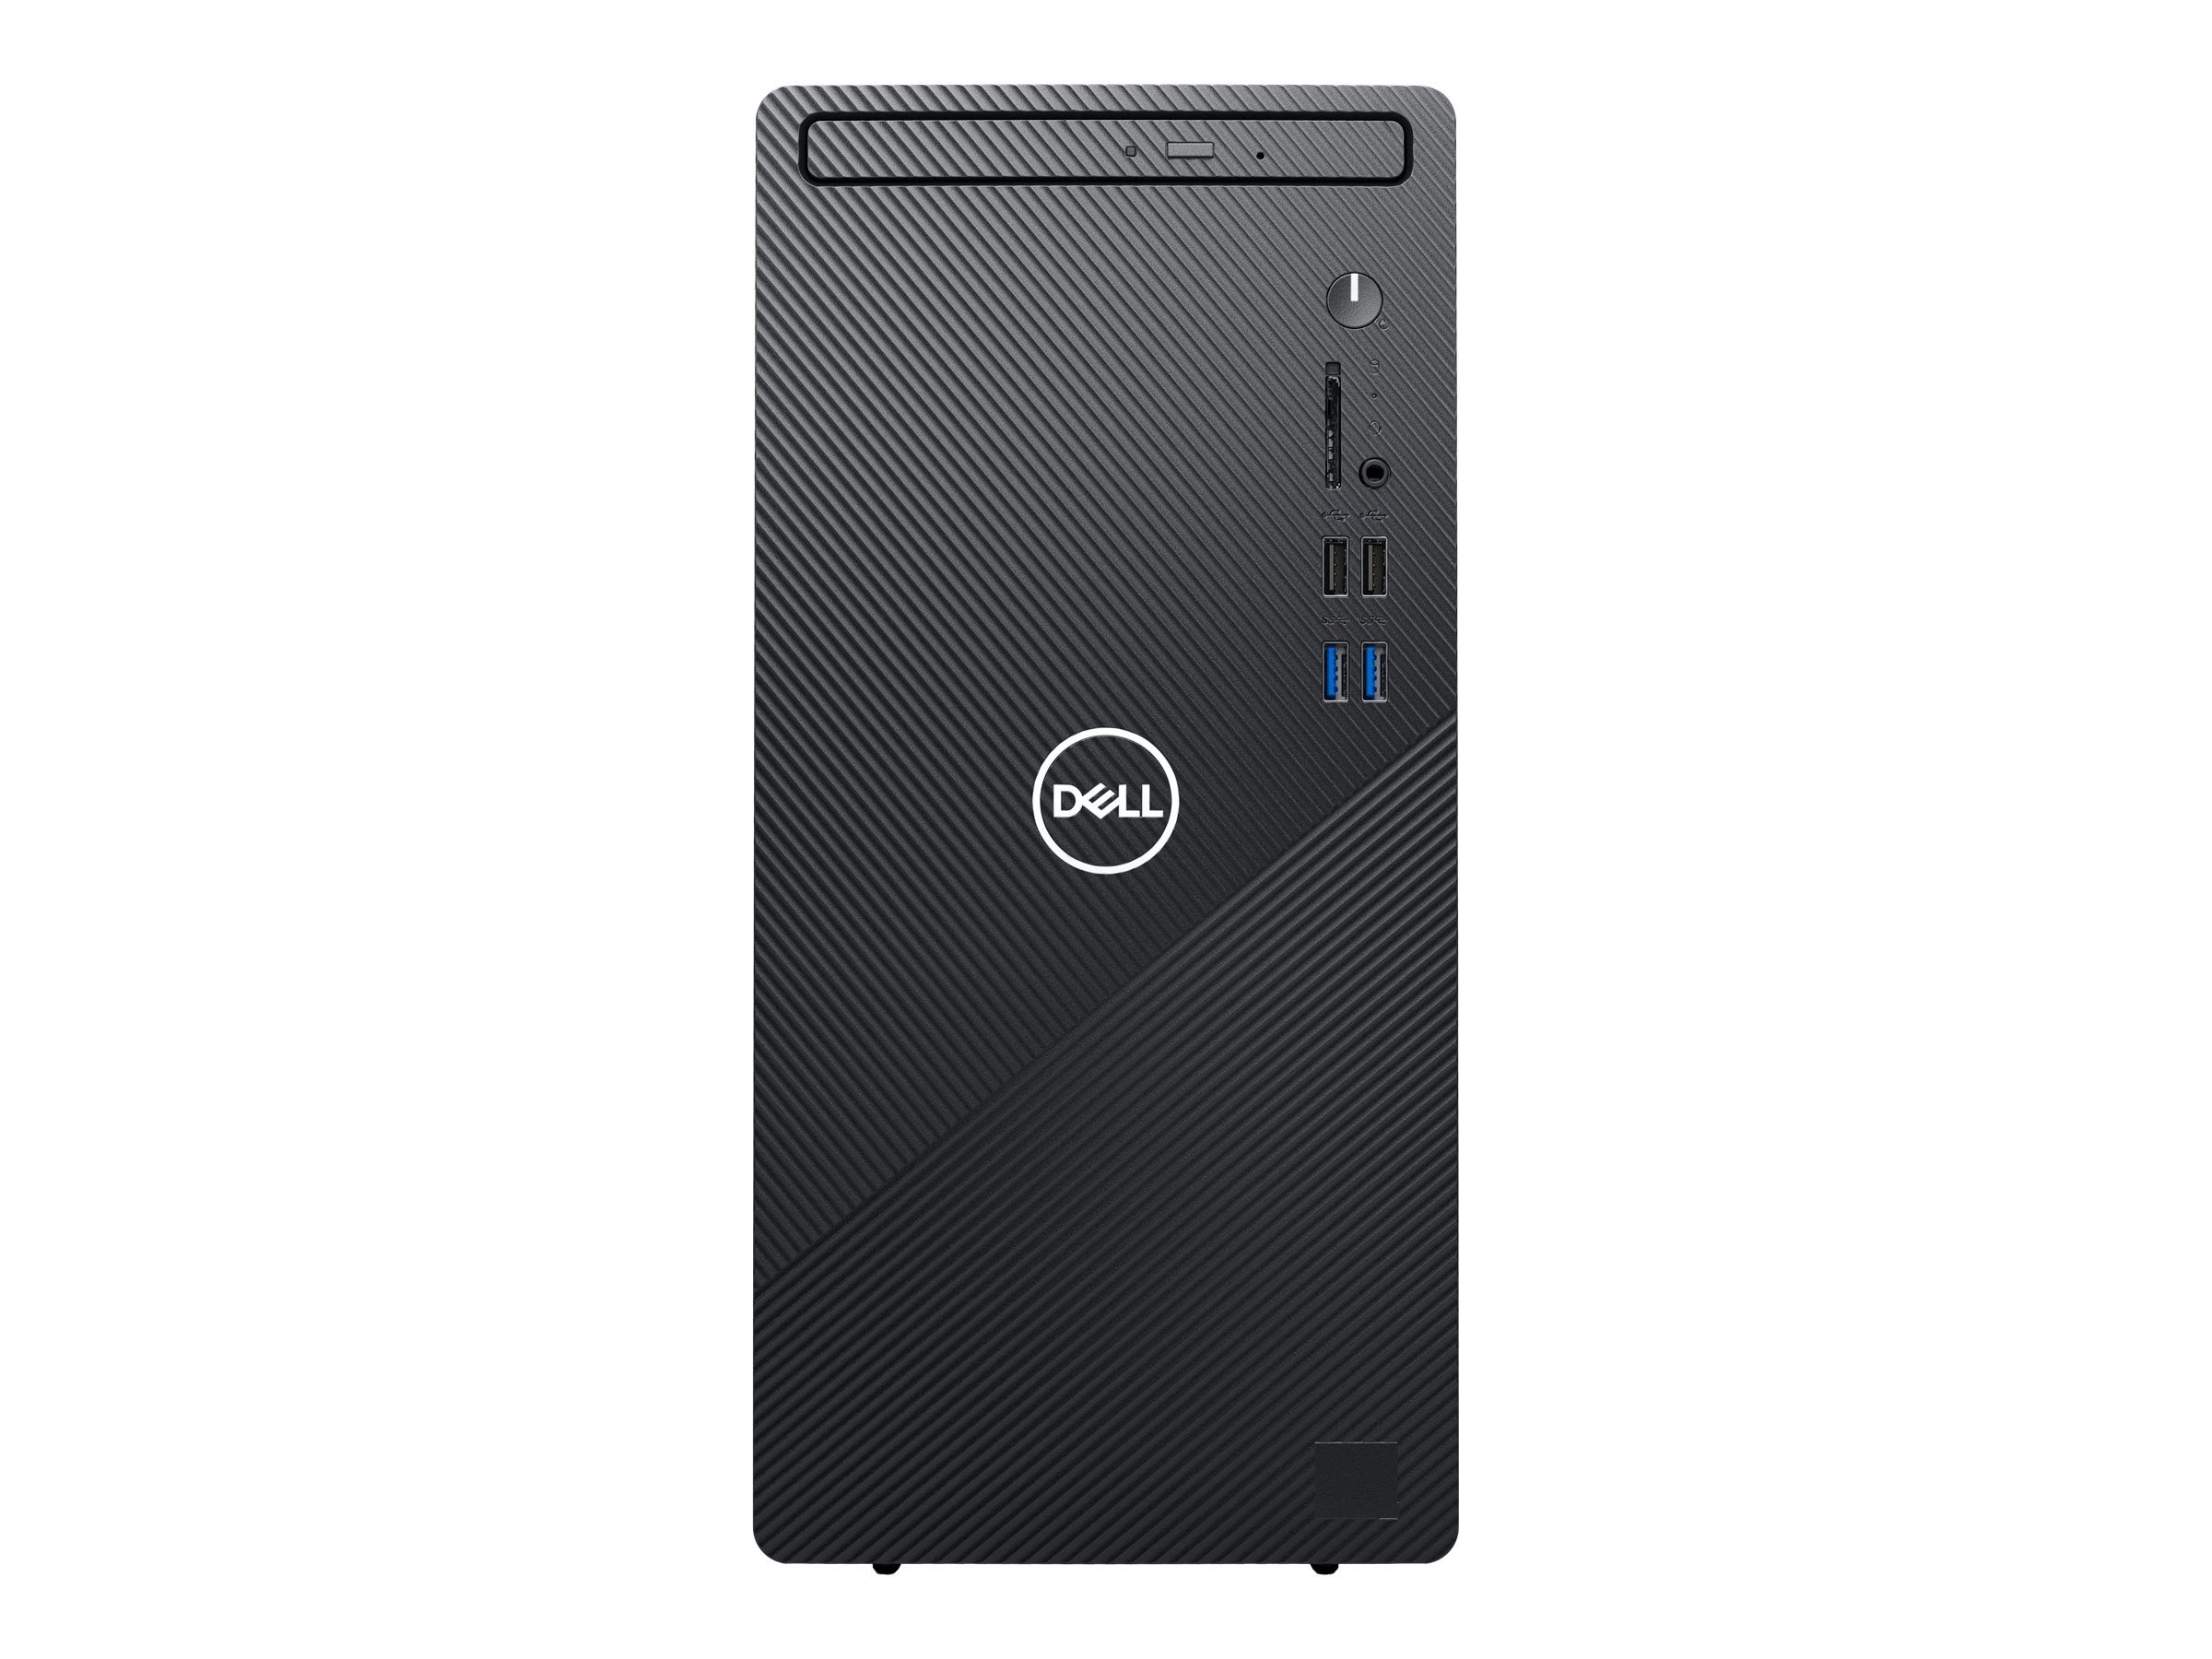 Dell Inspiron 3880 - Compact desktop - Core i7 10700 / 2.9 GHz - RAM 8 GB - SSD 512 GB - NVMe - DVD-Writer - UHD Graphics 630 - GigE - WLAN: Bluetooth, 802.11a/b/g/n/ac - Win 10 Home 64-bit - monitor: none - black - image 1 of 6